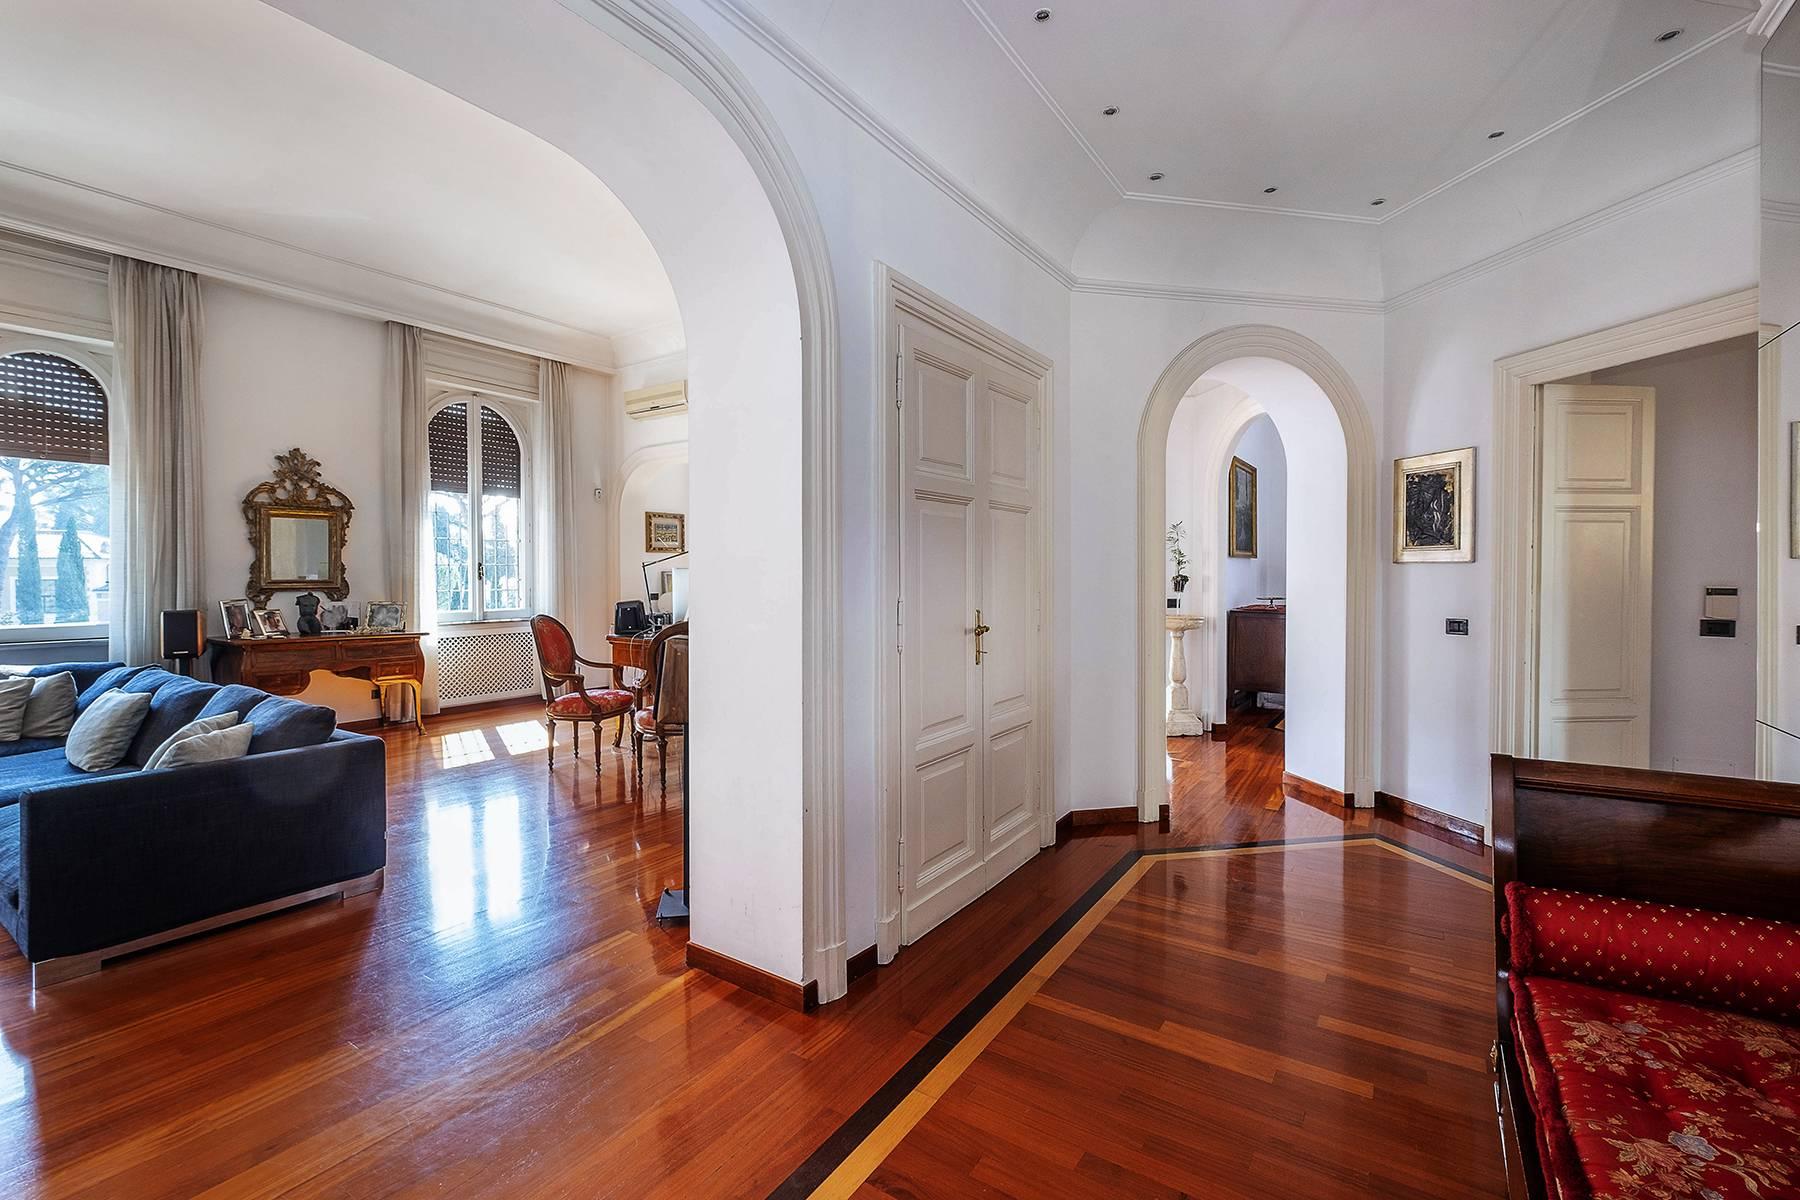 Superb penthouse located in an elegant Coppedè-style building - 2